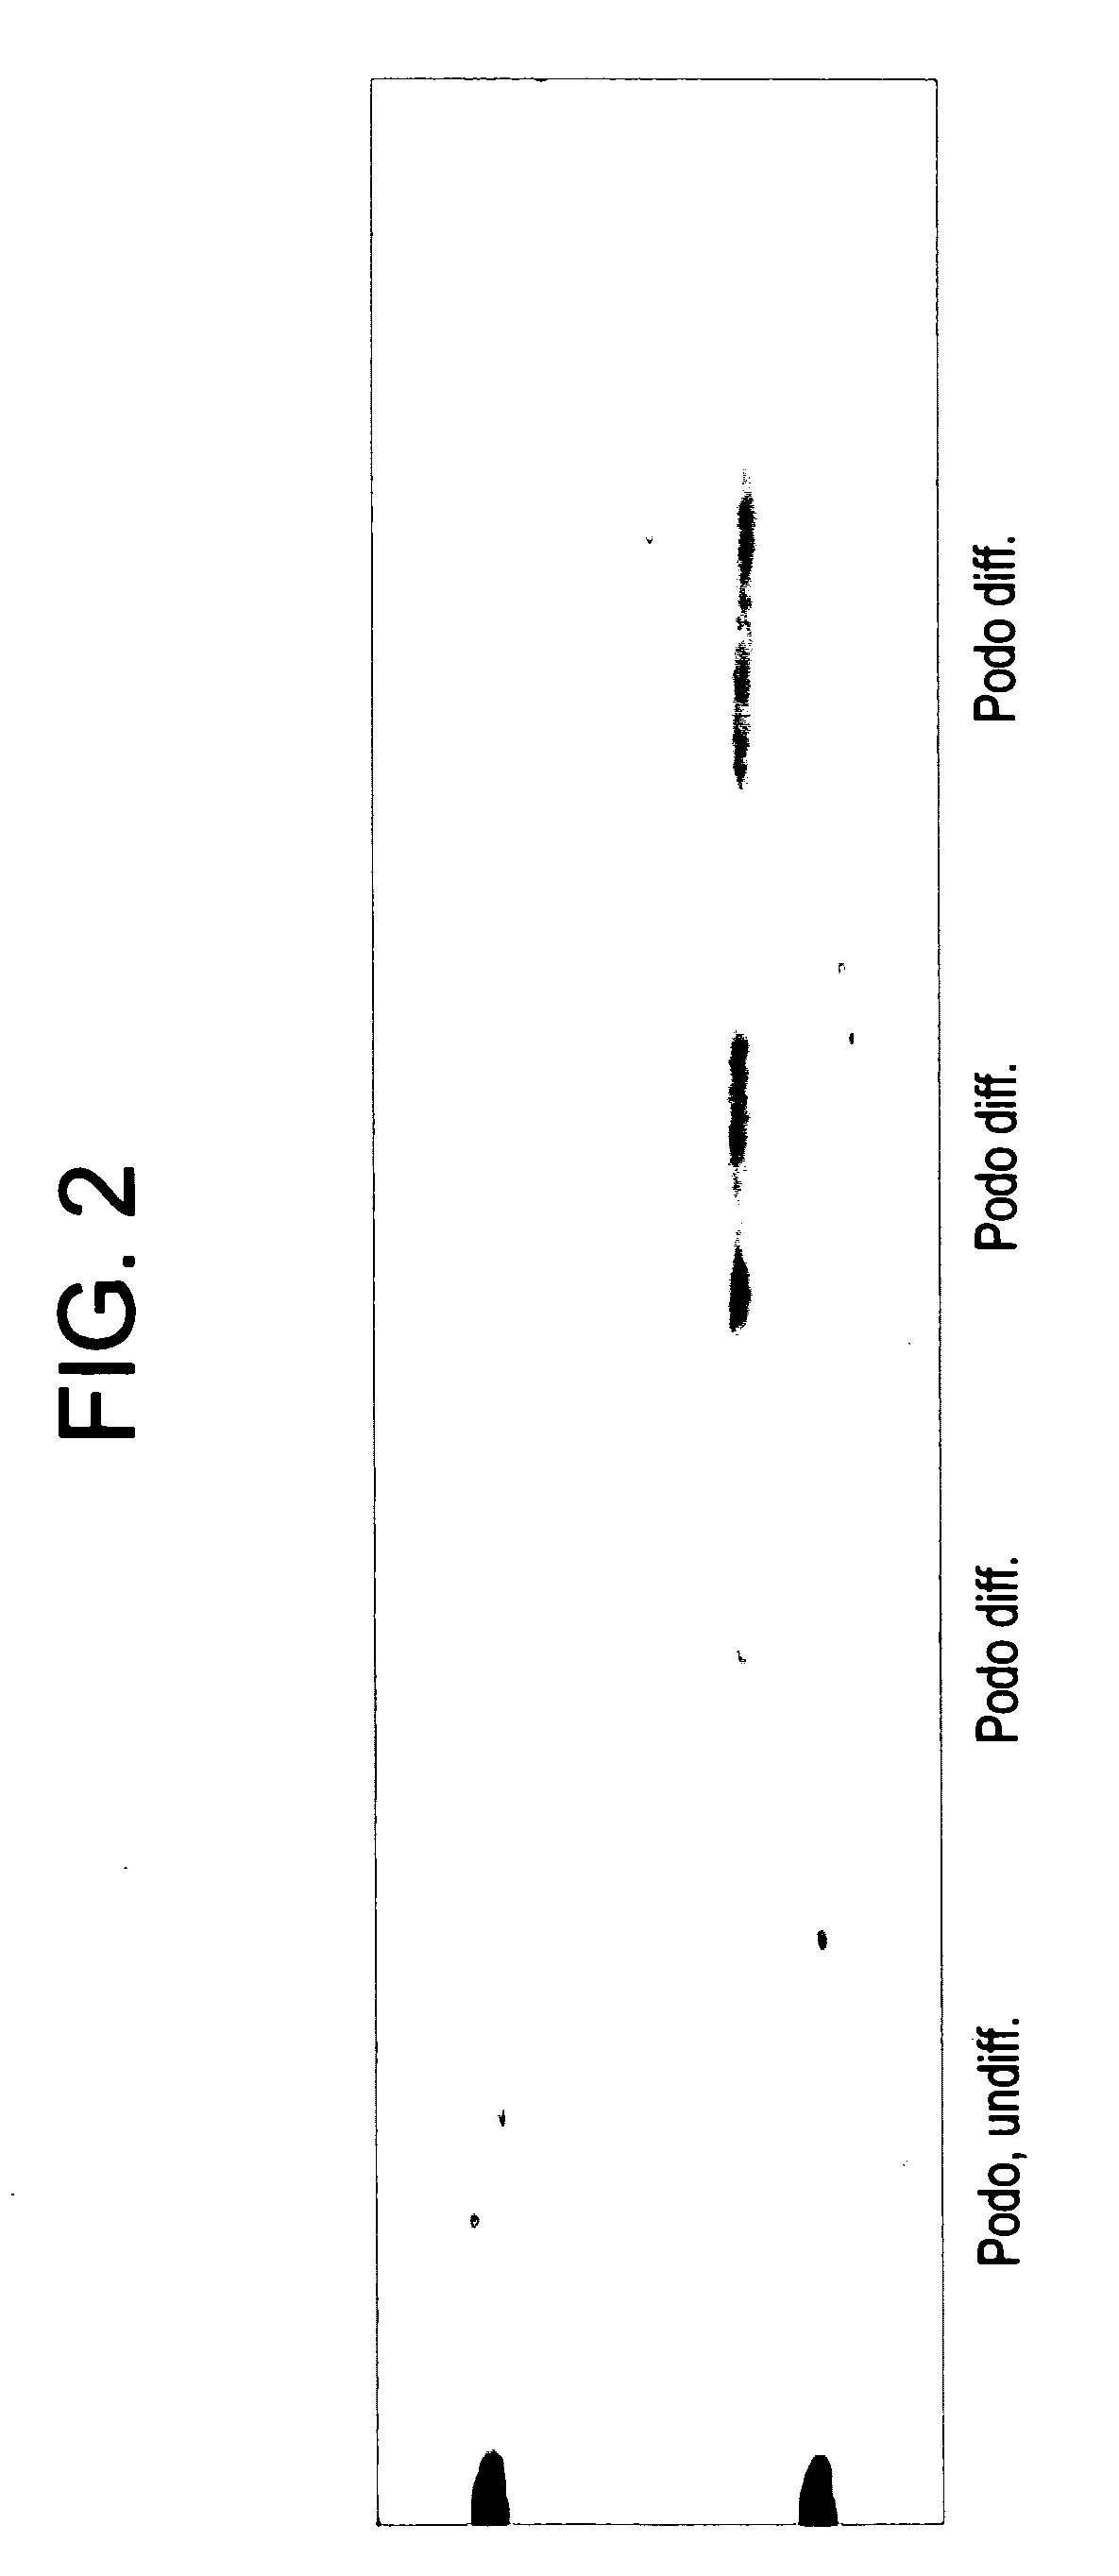 Methods for treating podocyte-related disorders